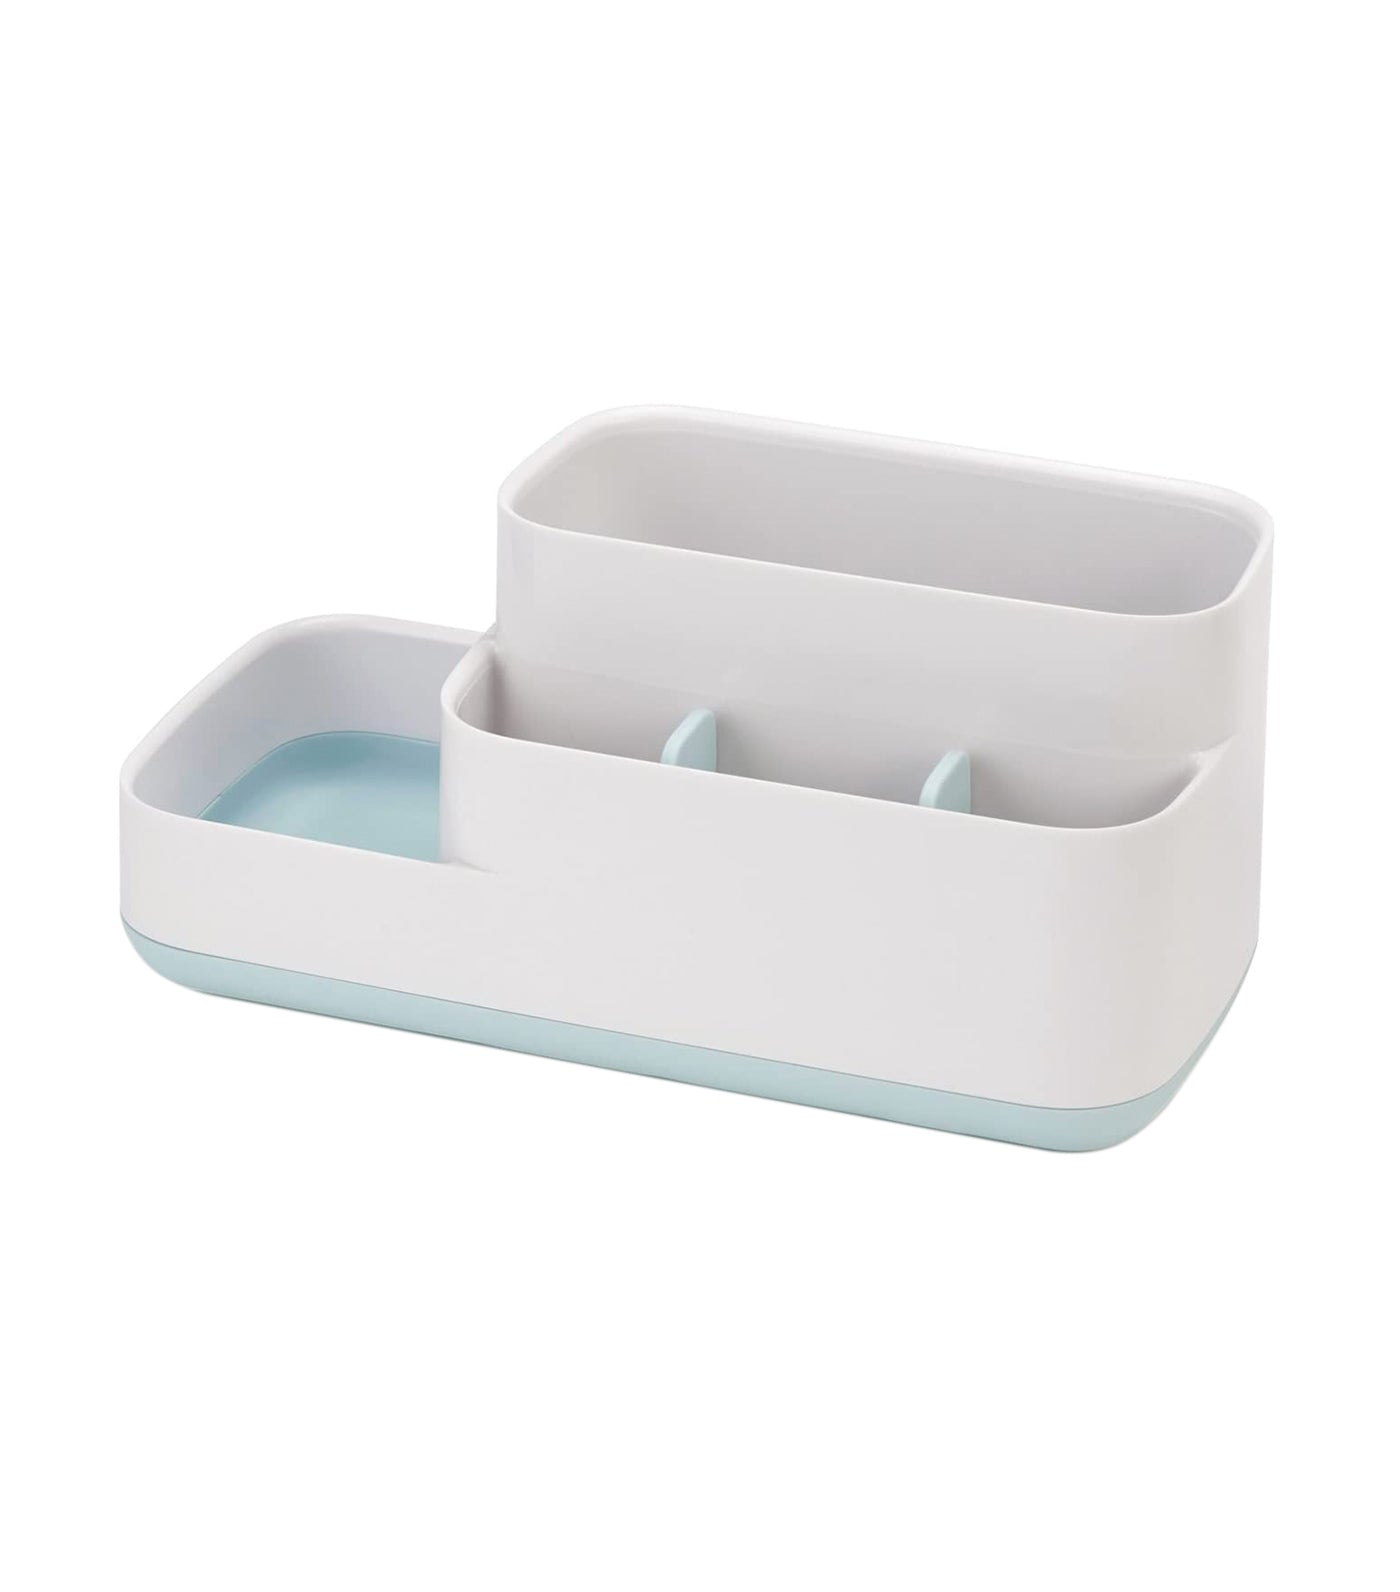 EasyStore™ Bathroom Storage Caddy - White and Light Blue